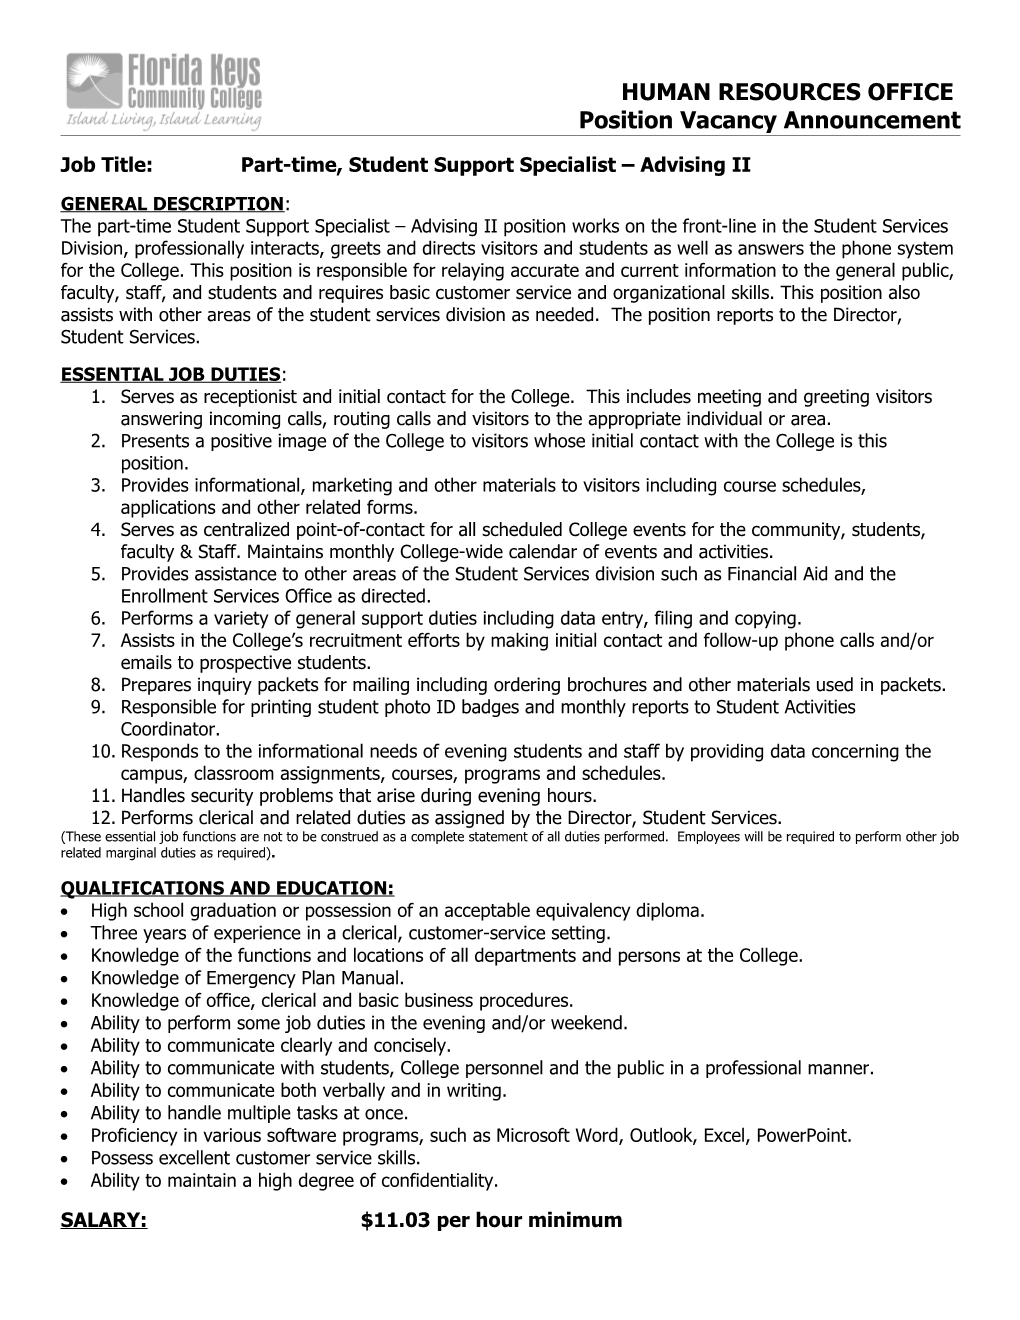 Job Title: Part-Time,Student Support Specialist Advising II